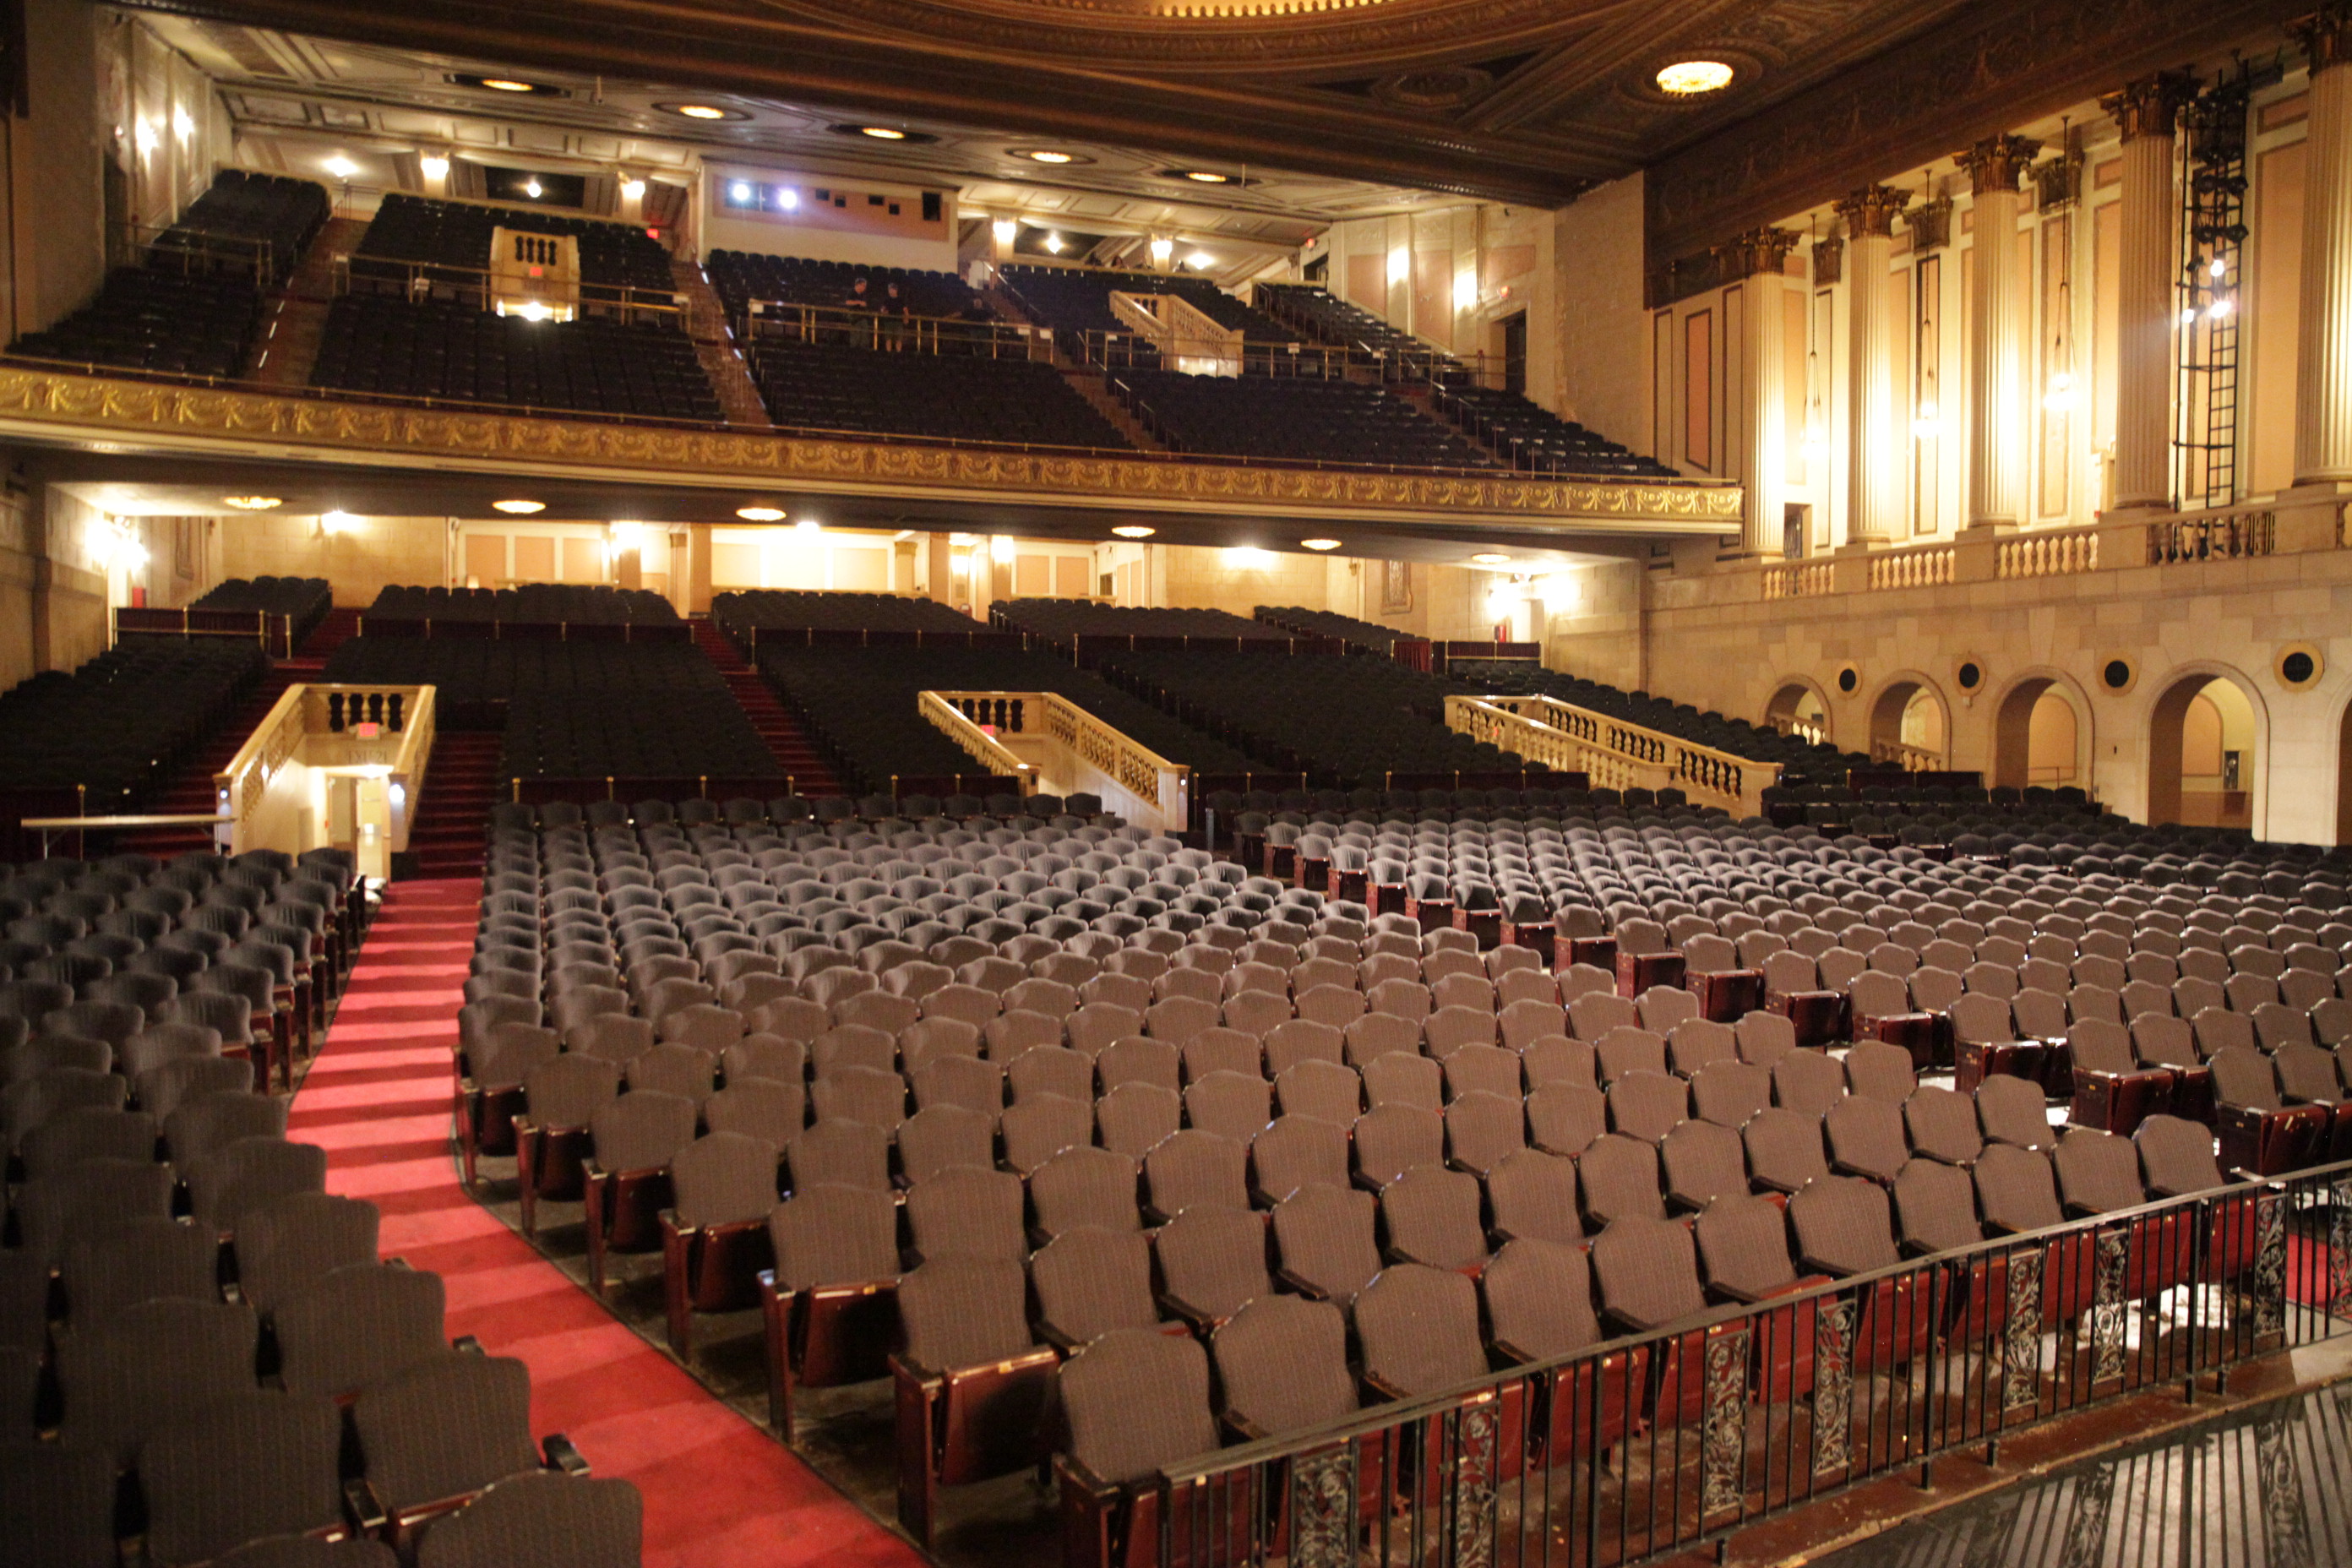 The venue is owned by the City of Newark and operated by the nonprofit Newark Performing Arts Corporation.